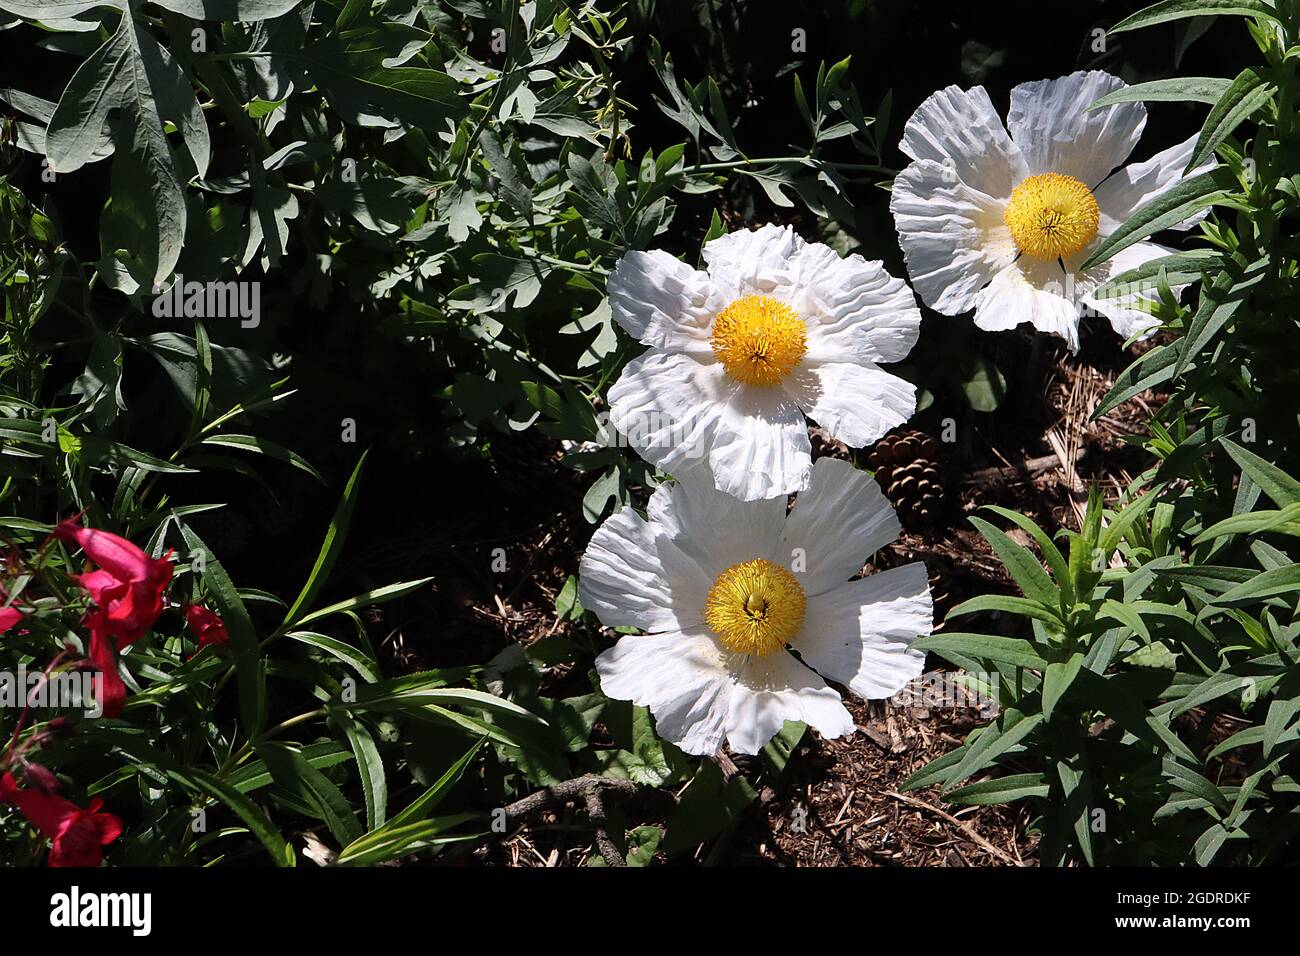 Romneya coulteri California tree poppy – large crinkled poppy-like flowers with white outer petals and yellow stamen boss,  July, England, UK Stock Photo